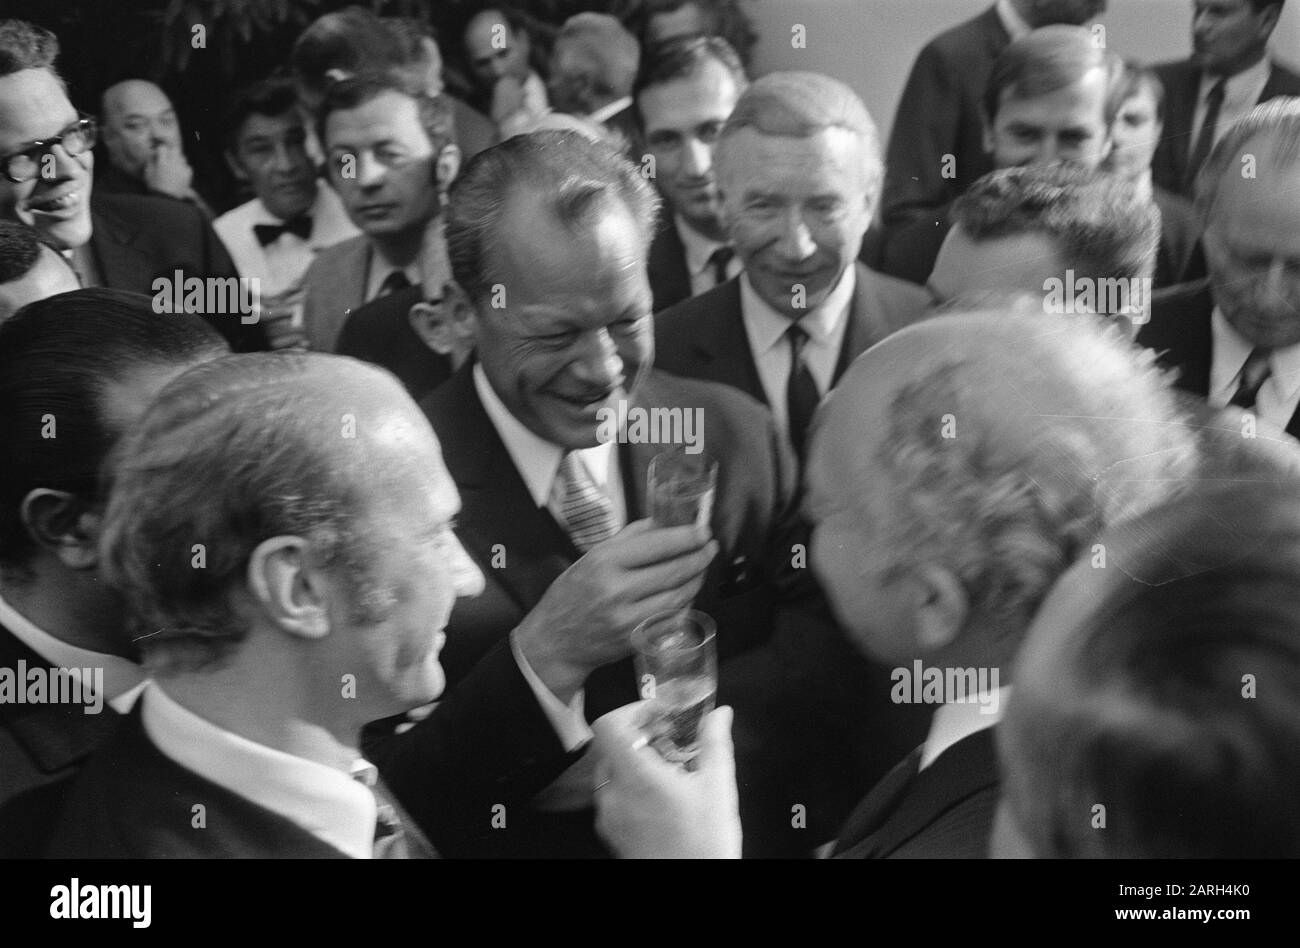 Willy Brandt (SPD) elected Chancellor of West Germany in Bonn. Brandt brings toast, Walter Scheel (FDP), Foreign Minister/Date: 21 October 1969 Location: Bonn, Germany Keywords: Chancellors, Ministers Personal name: Brandt, Willy, Scheel, Walter Institution Name: SPD Stock Photo